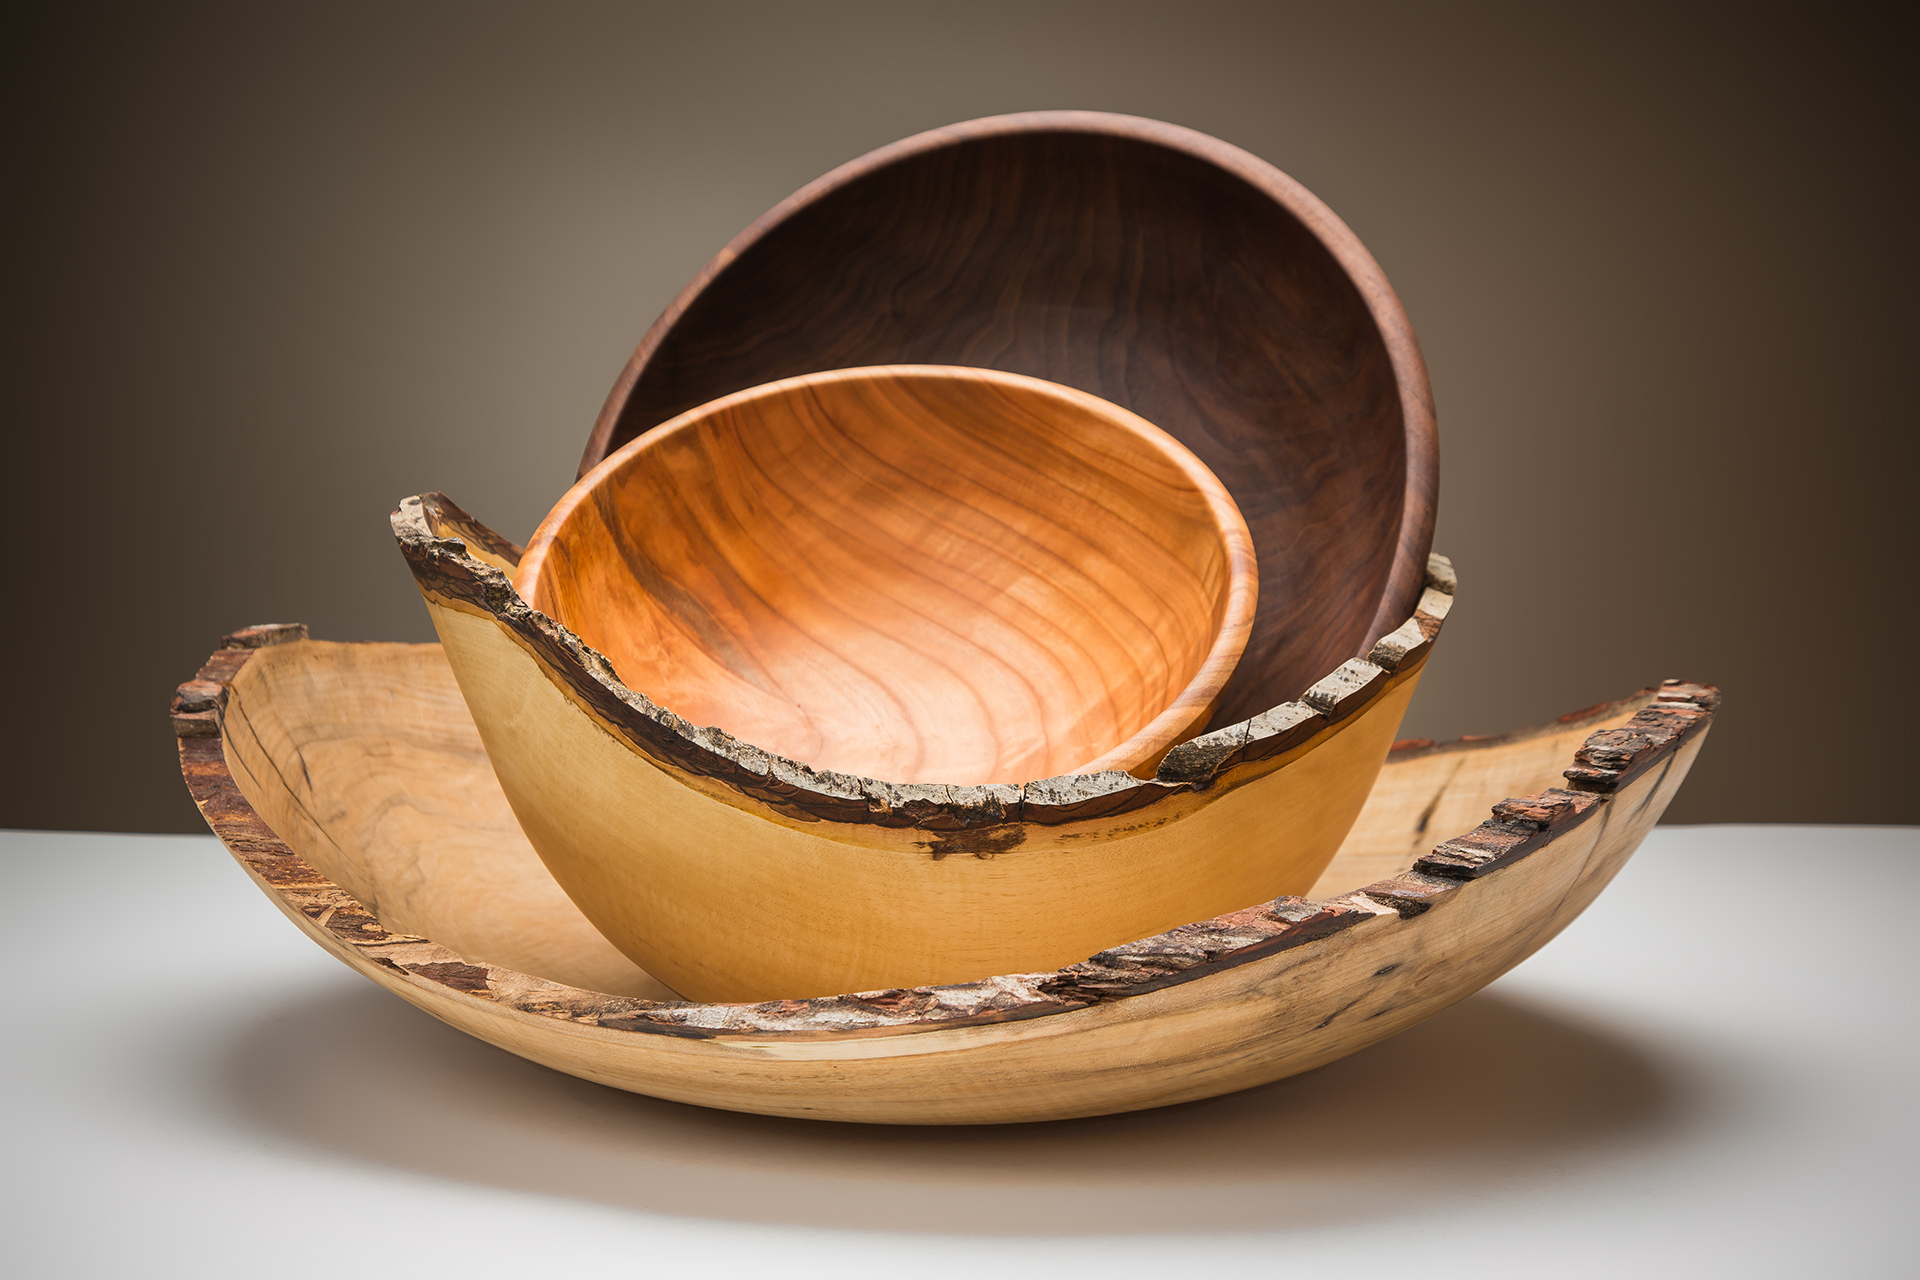 Artisan Bowls Made from Discarded Trees